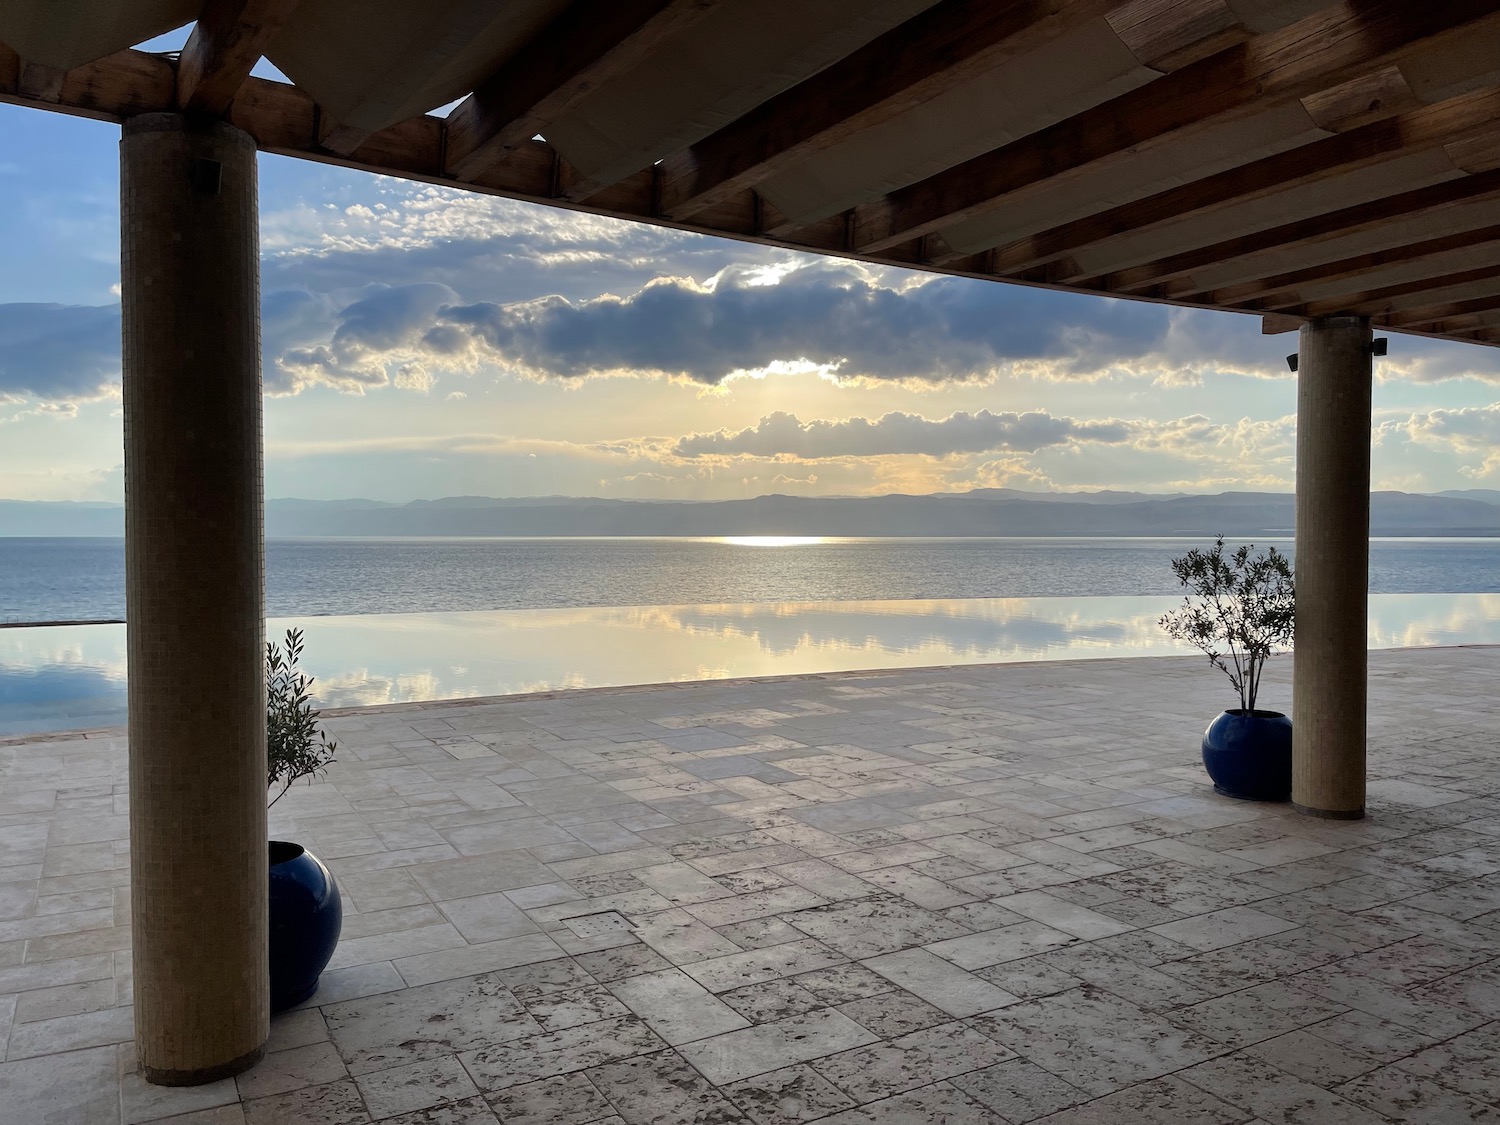 a covered patio with a view of the ocean and mountains in the distance